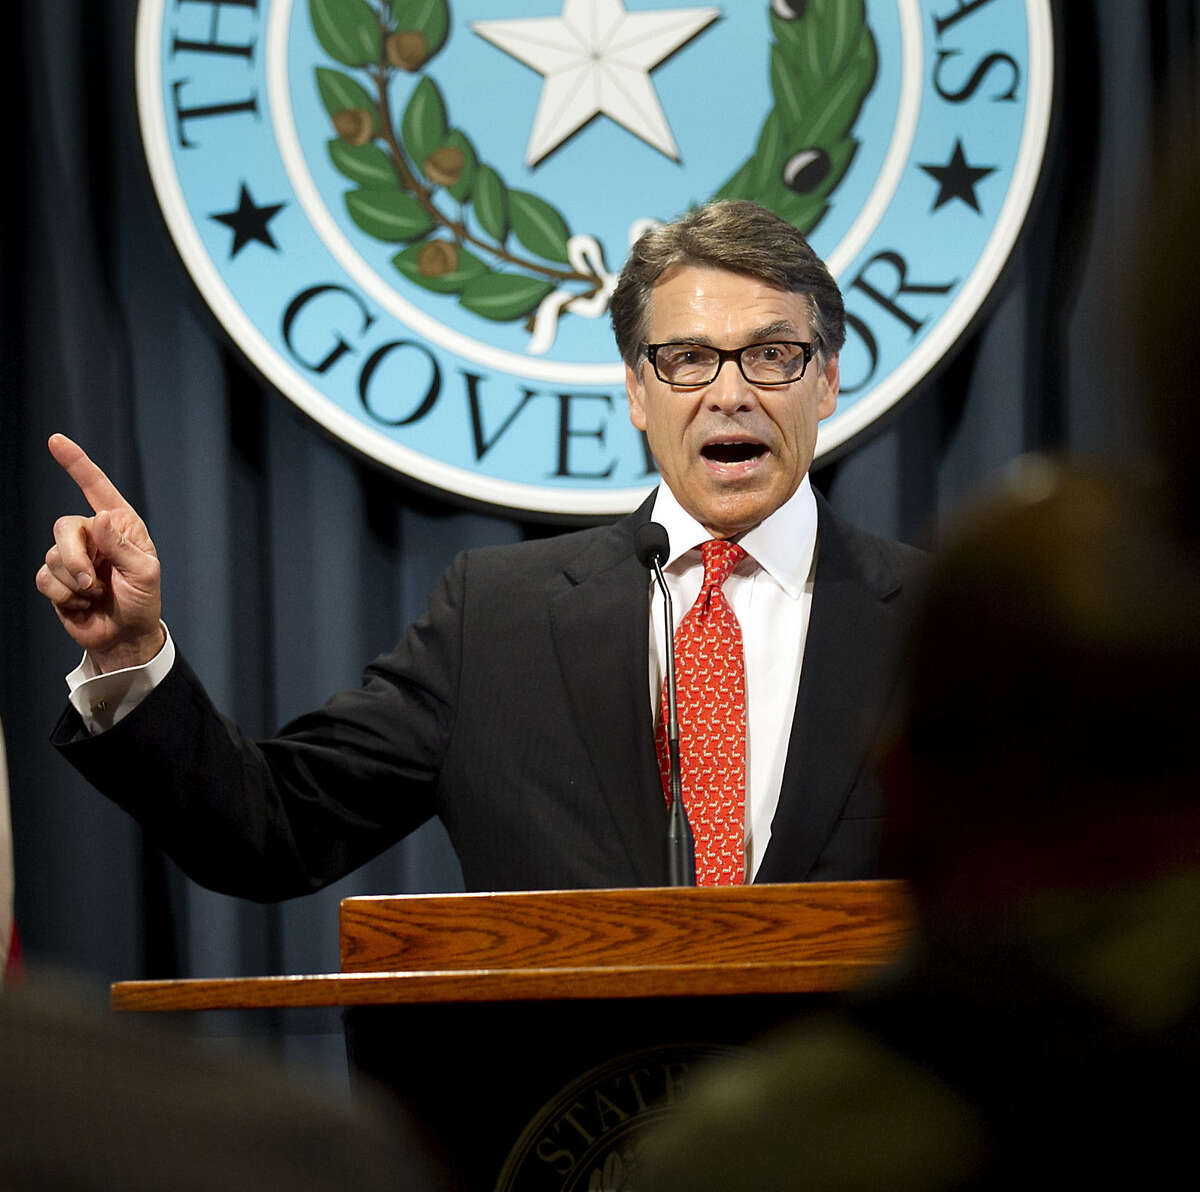 Gov. Rick Perry responds to his indictment on charges of coercion of a public servant and abuse of his official capacity. The indictment appears to be a troubling use of the criminal jusice system for political reasons.